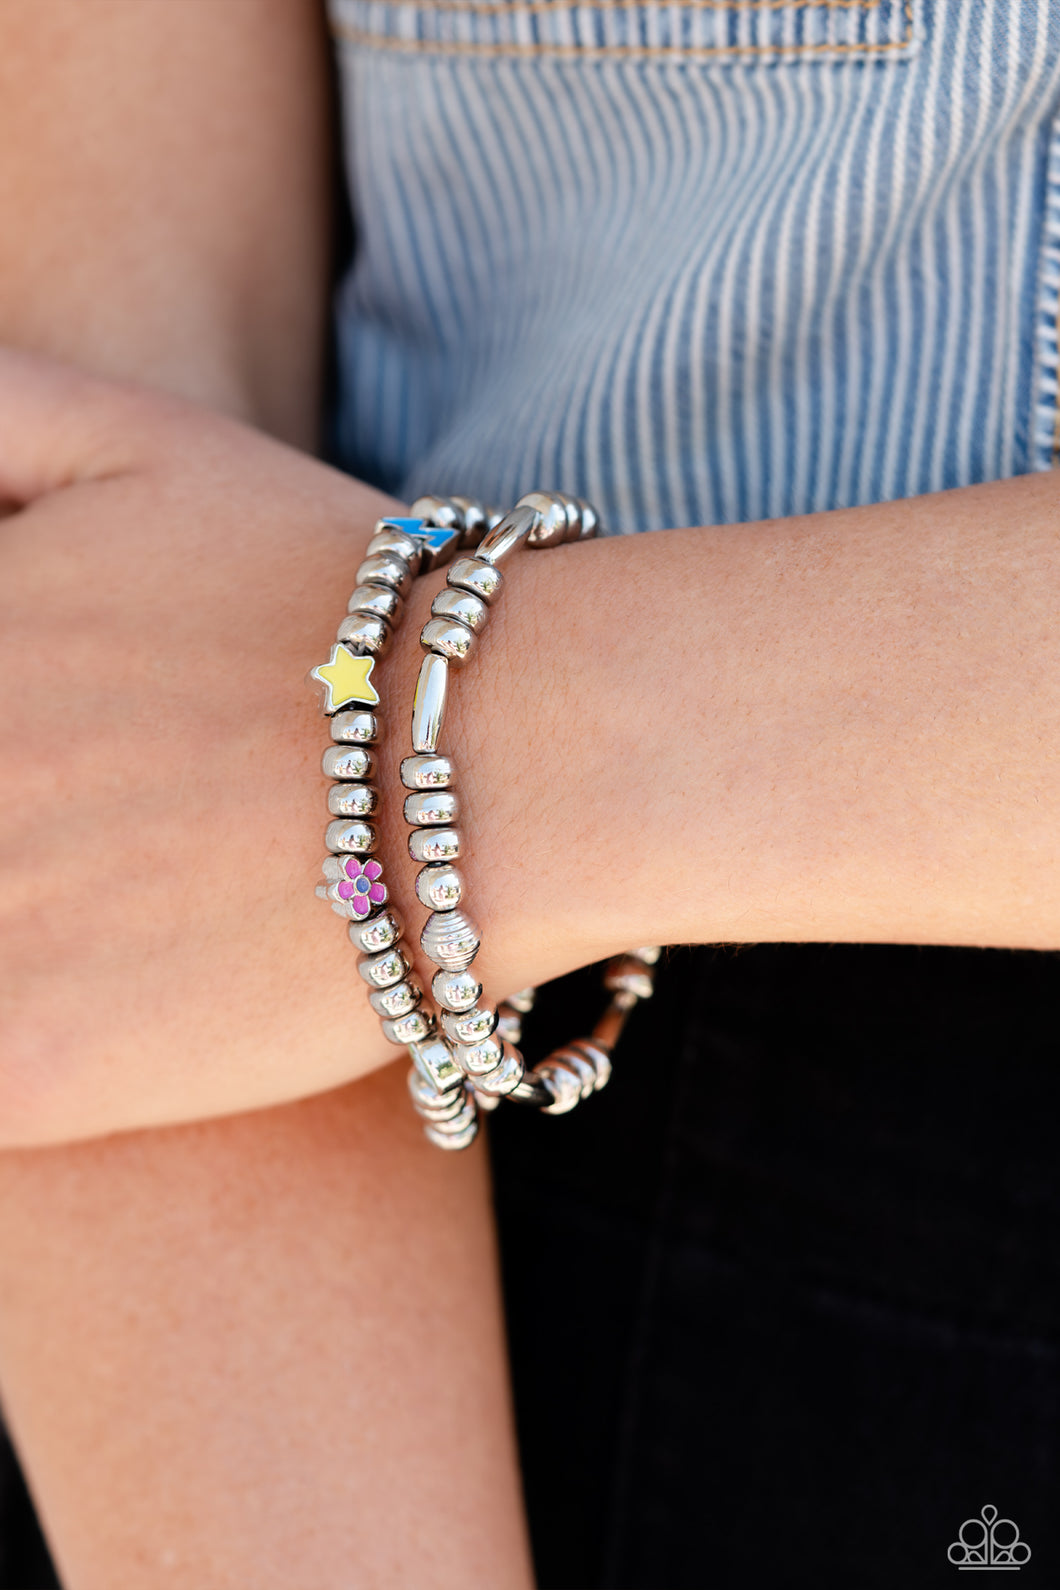 A strand of textured, cylindrical, and round high-sheen silver beads combine with a single strand of silver beads, sporadically infused with vivacious charm beads to create an energetic stack of stretchy bracelets. The colorful beaded stack features a yellow star, blue lightning bolt, green money bag, orange tropical flower, red lips, blue and green earth, pink and purple flower, and a pink heart charm with the words 